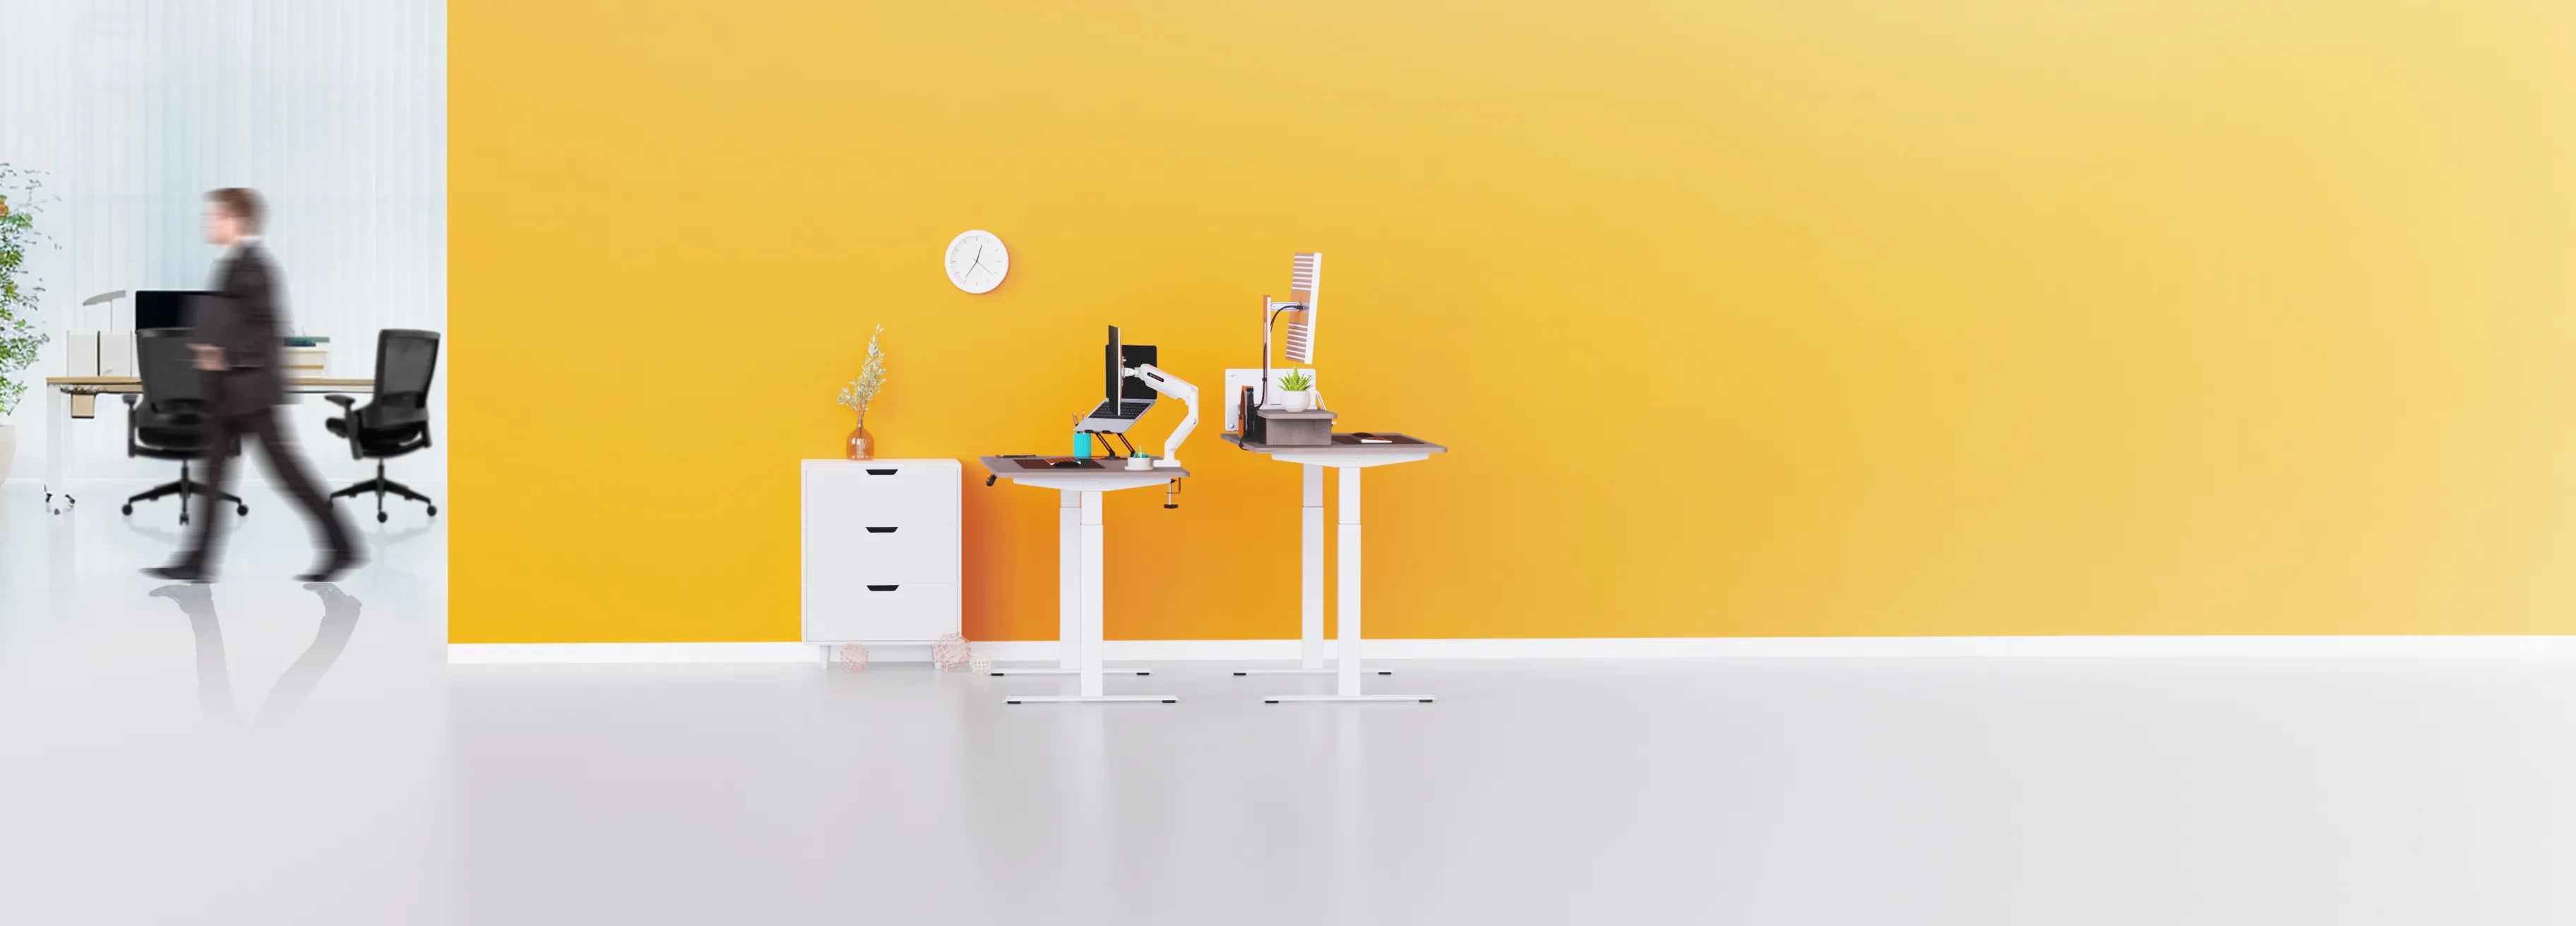 Flujo standing desks and office chairs in a contemporary workspace